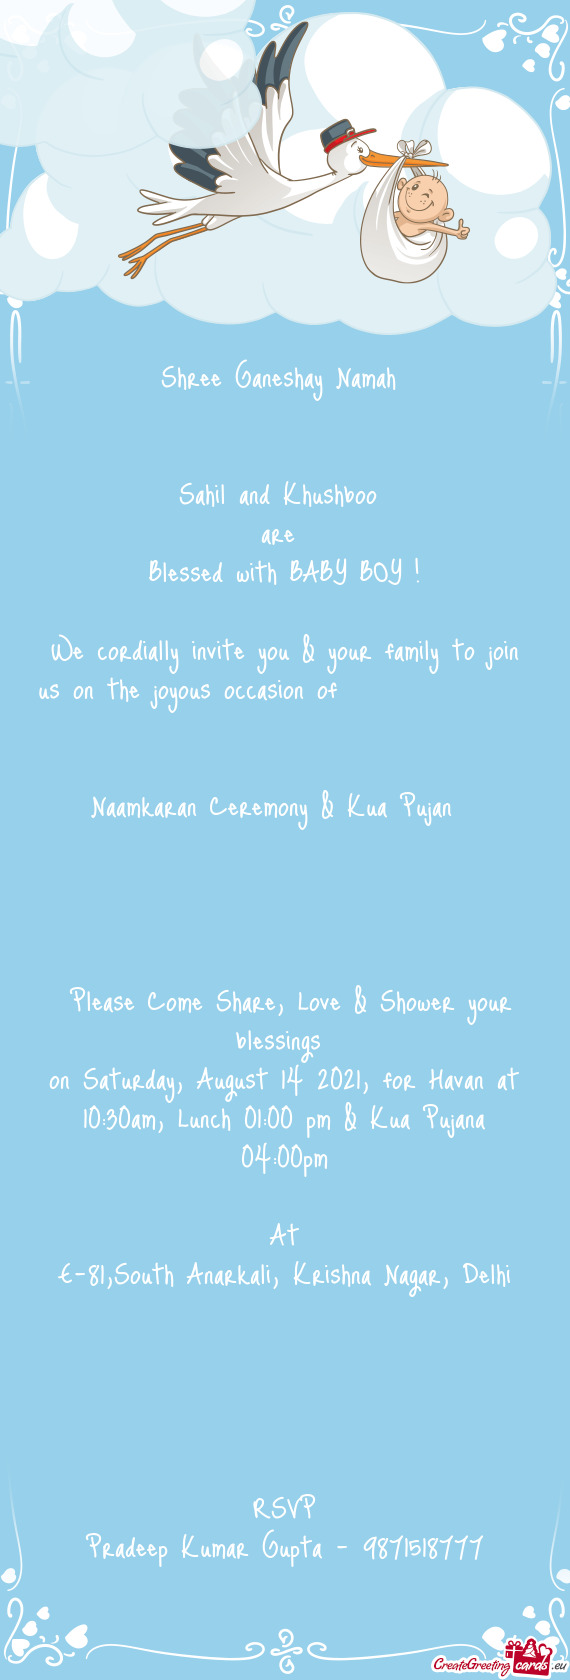 Please Come Share, Love & Shower your blessings